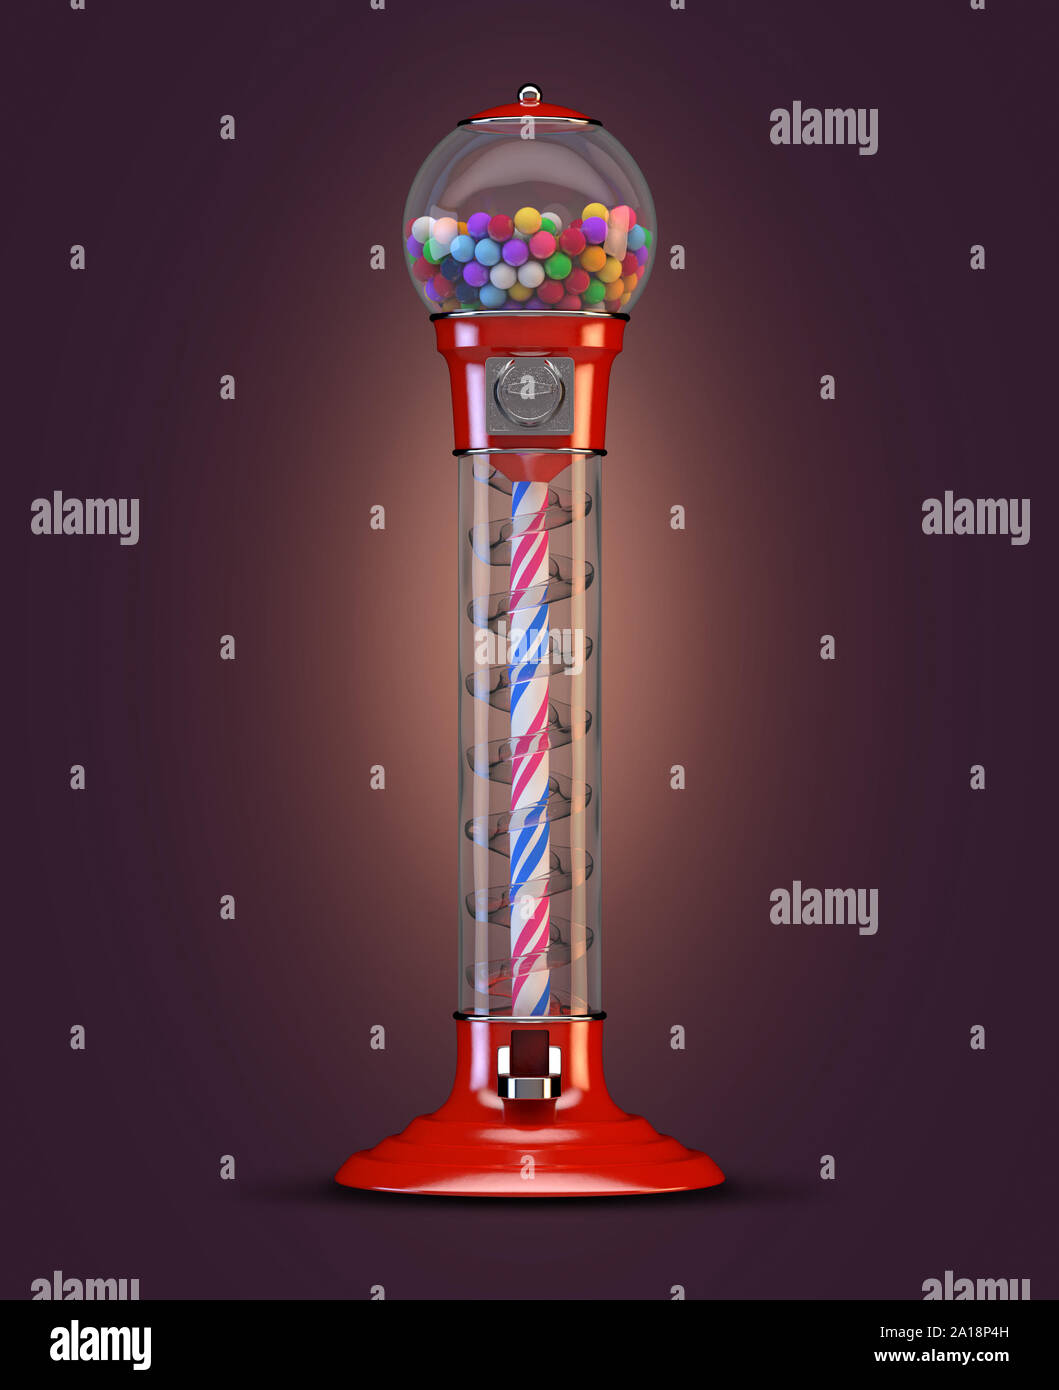 A red vintage gumball dispensing machine filled with multicolored gumballs on an isolated dark background - 3D render Stock Photo